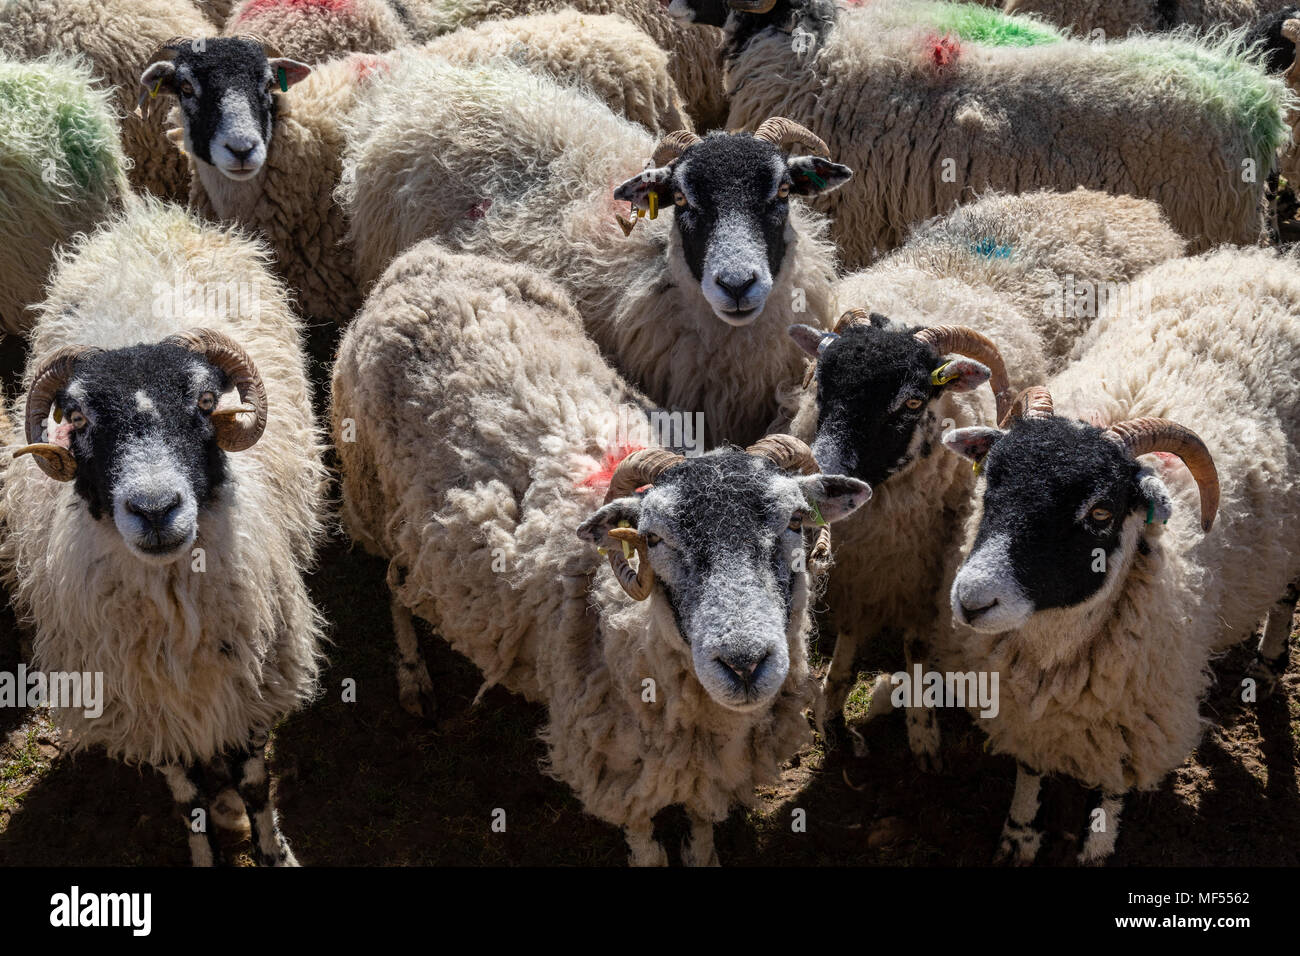 Swaledale sheep in the Yorkshire Dales in northeast England. Swaledales are noted for their off-white wool, curled horns and white around their nose a Stock Photo